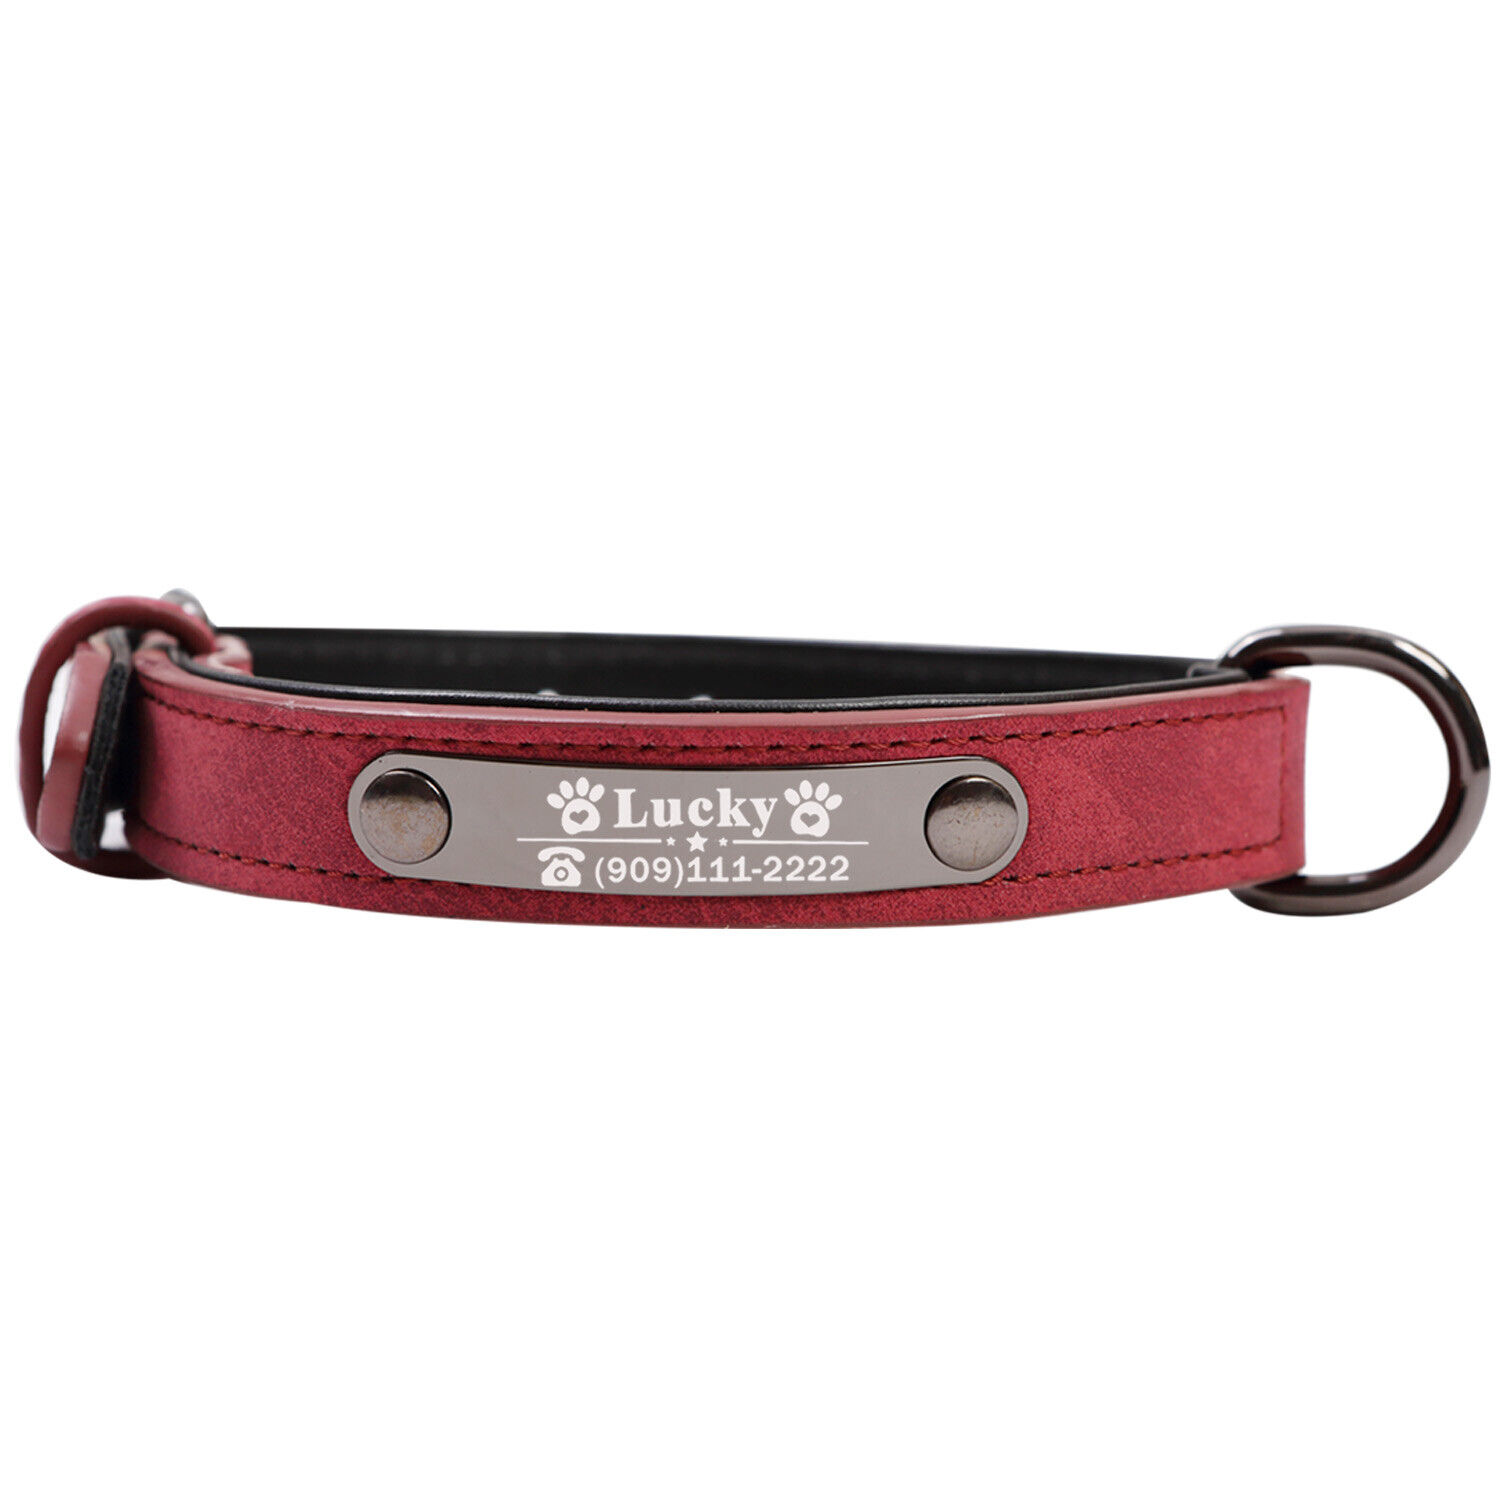 Soft Leather Personalized Dog Collar Engrave ID Name Custom for Small Large Dogs